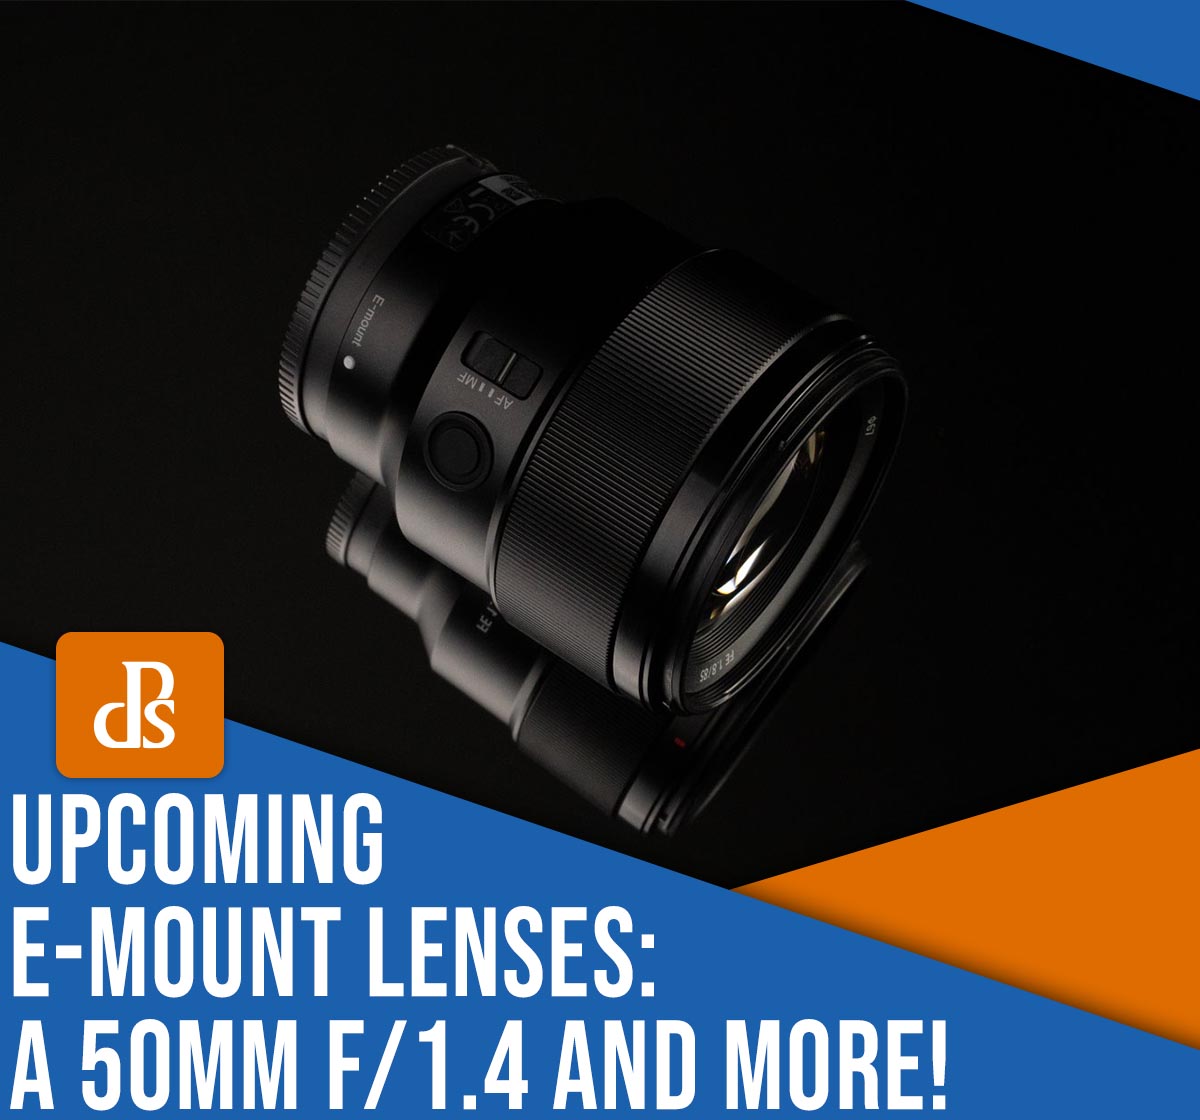 Upcoming E-mount lenses: A 50mm f/1.4 and more